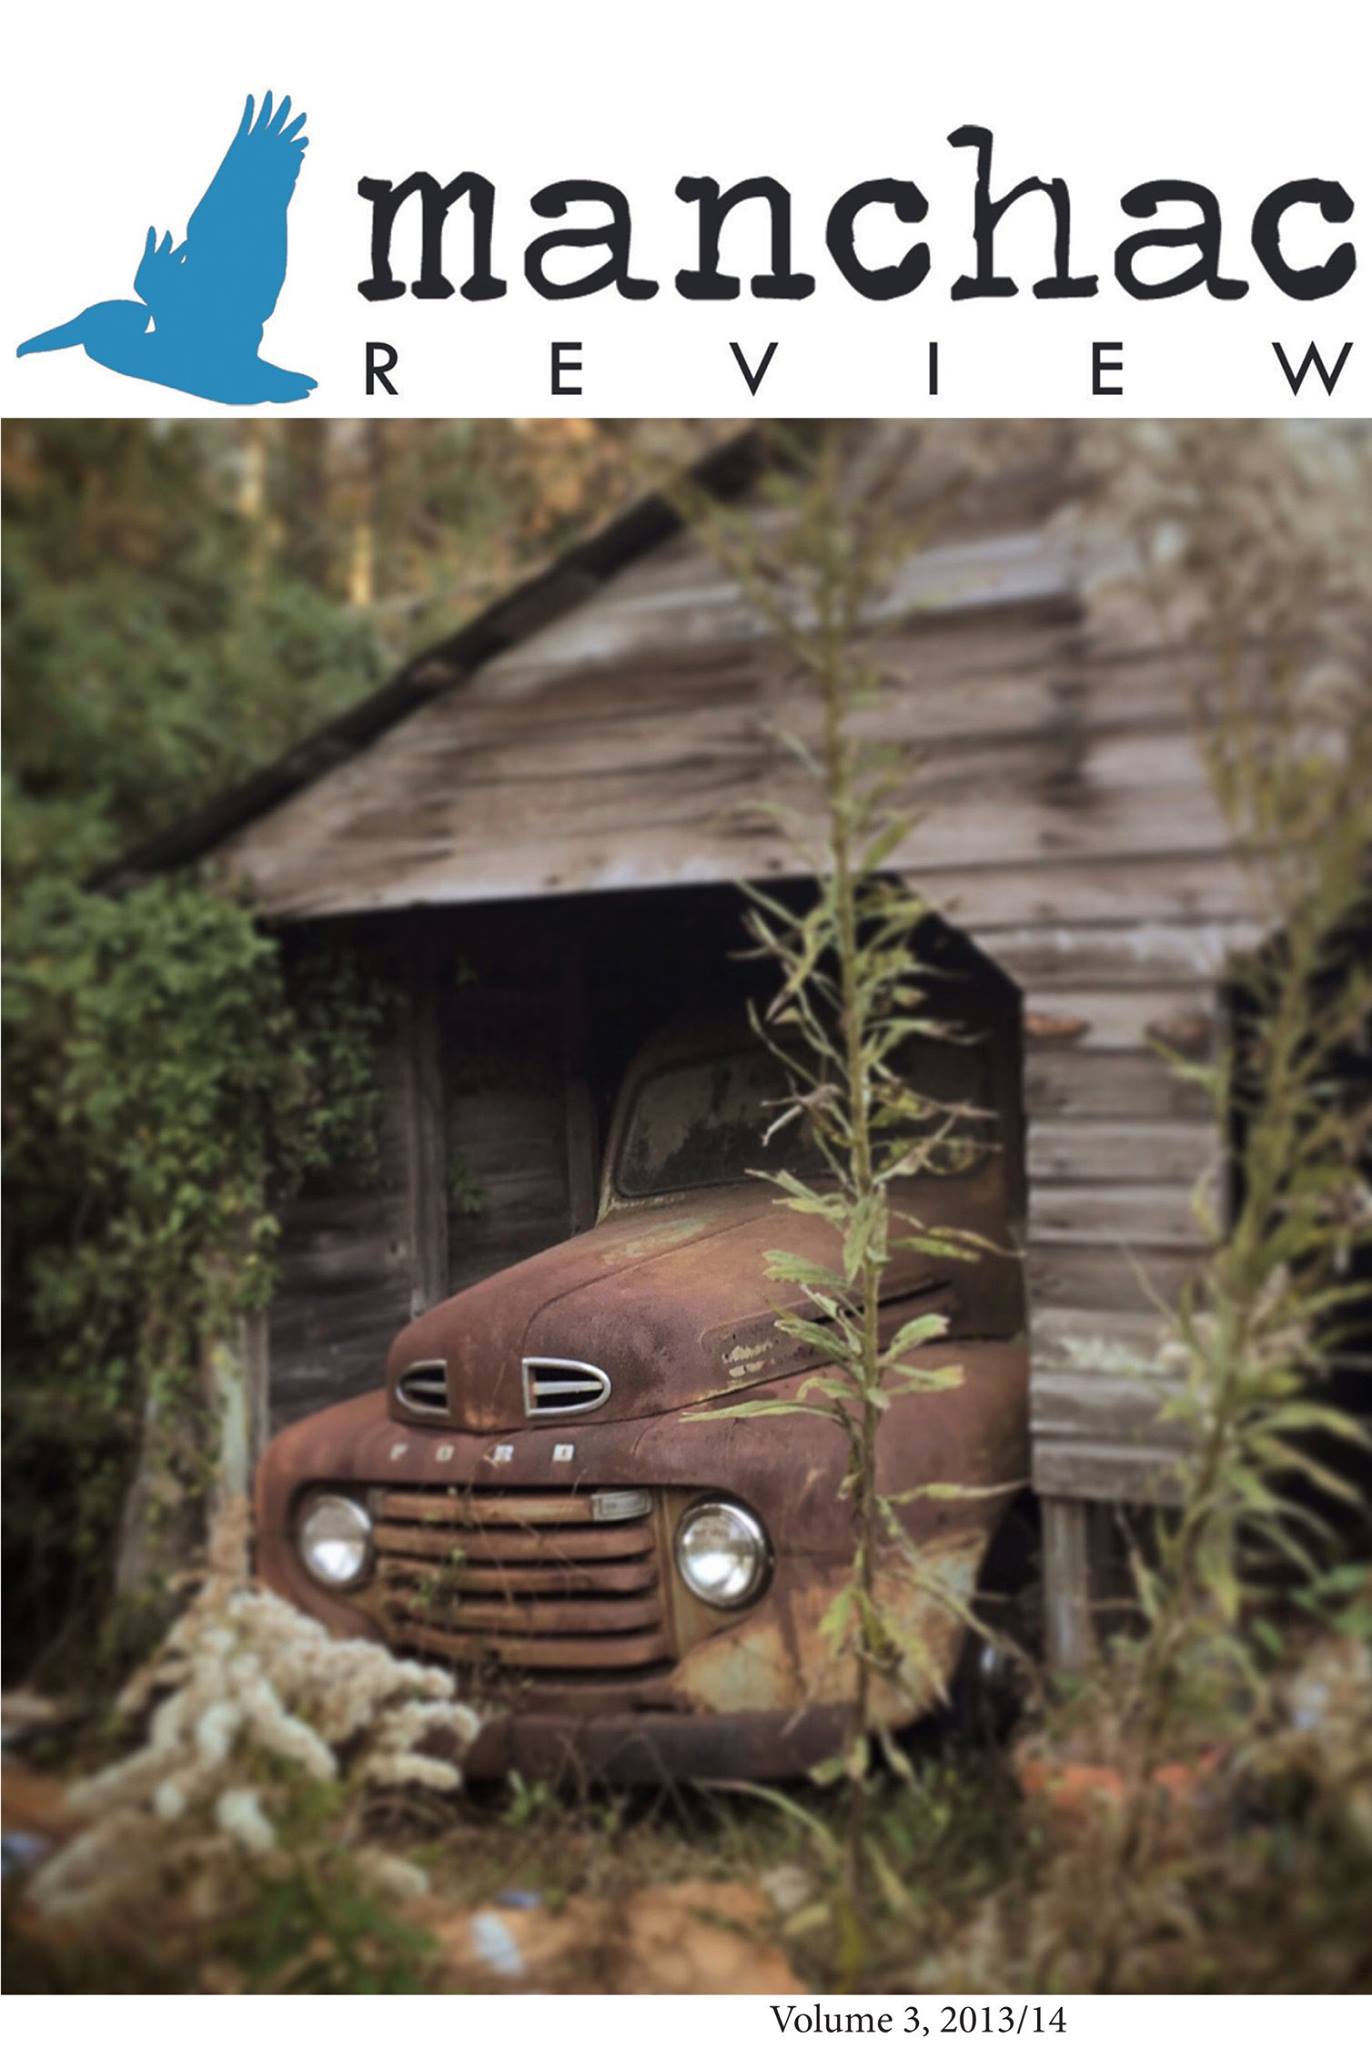 The cover of the Manchac Review, the Southeastern English Department's creative journal.